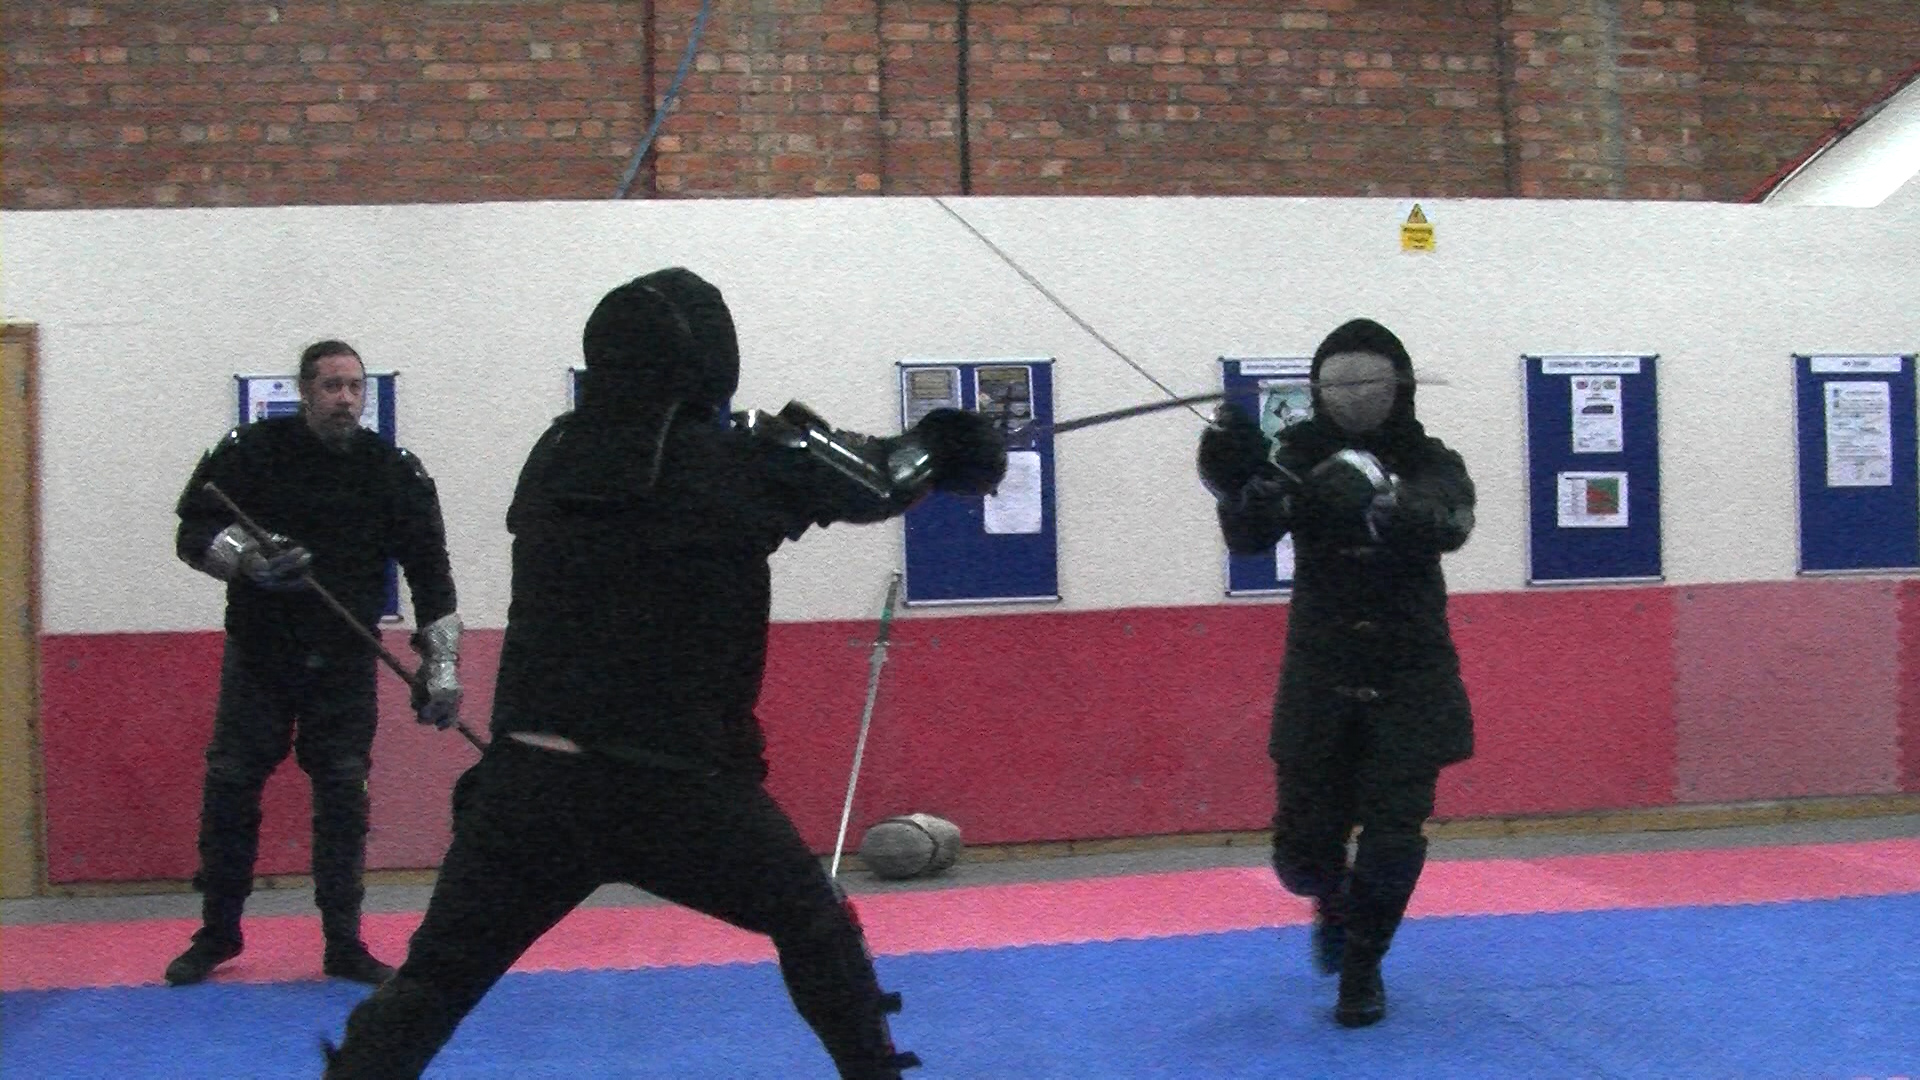 Two fighters duel it out in a sword fight at Wolfshead Martial Arts centre in Lincoln.